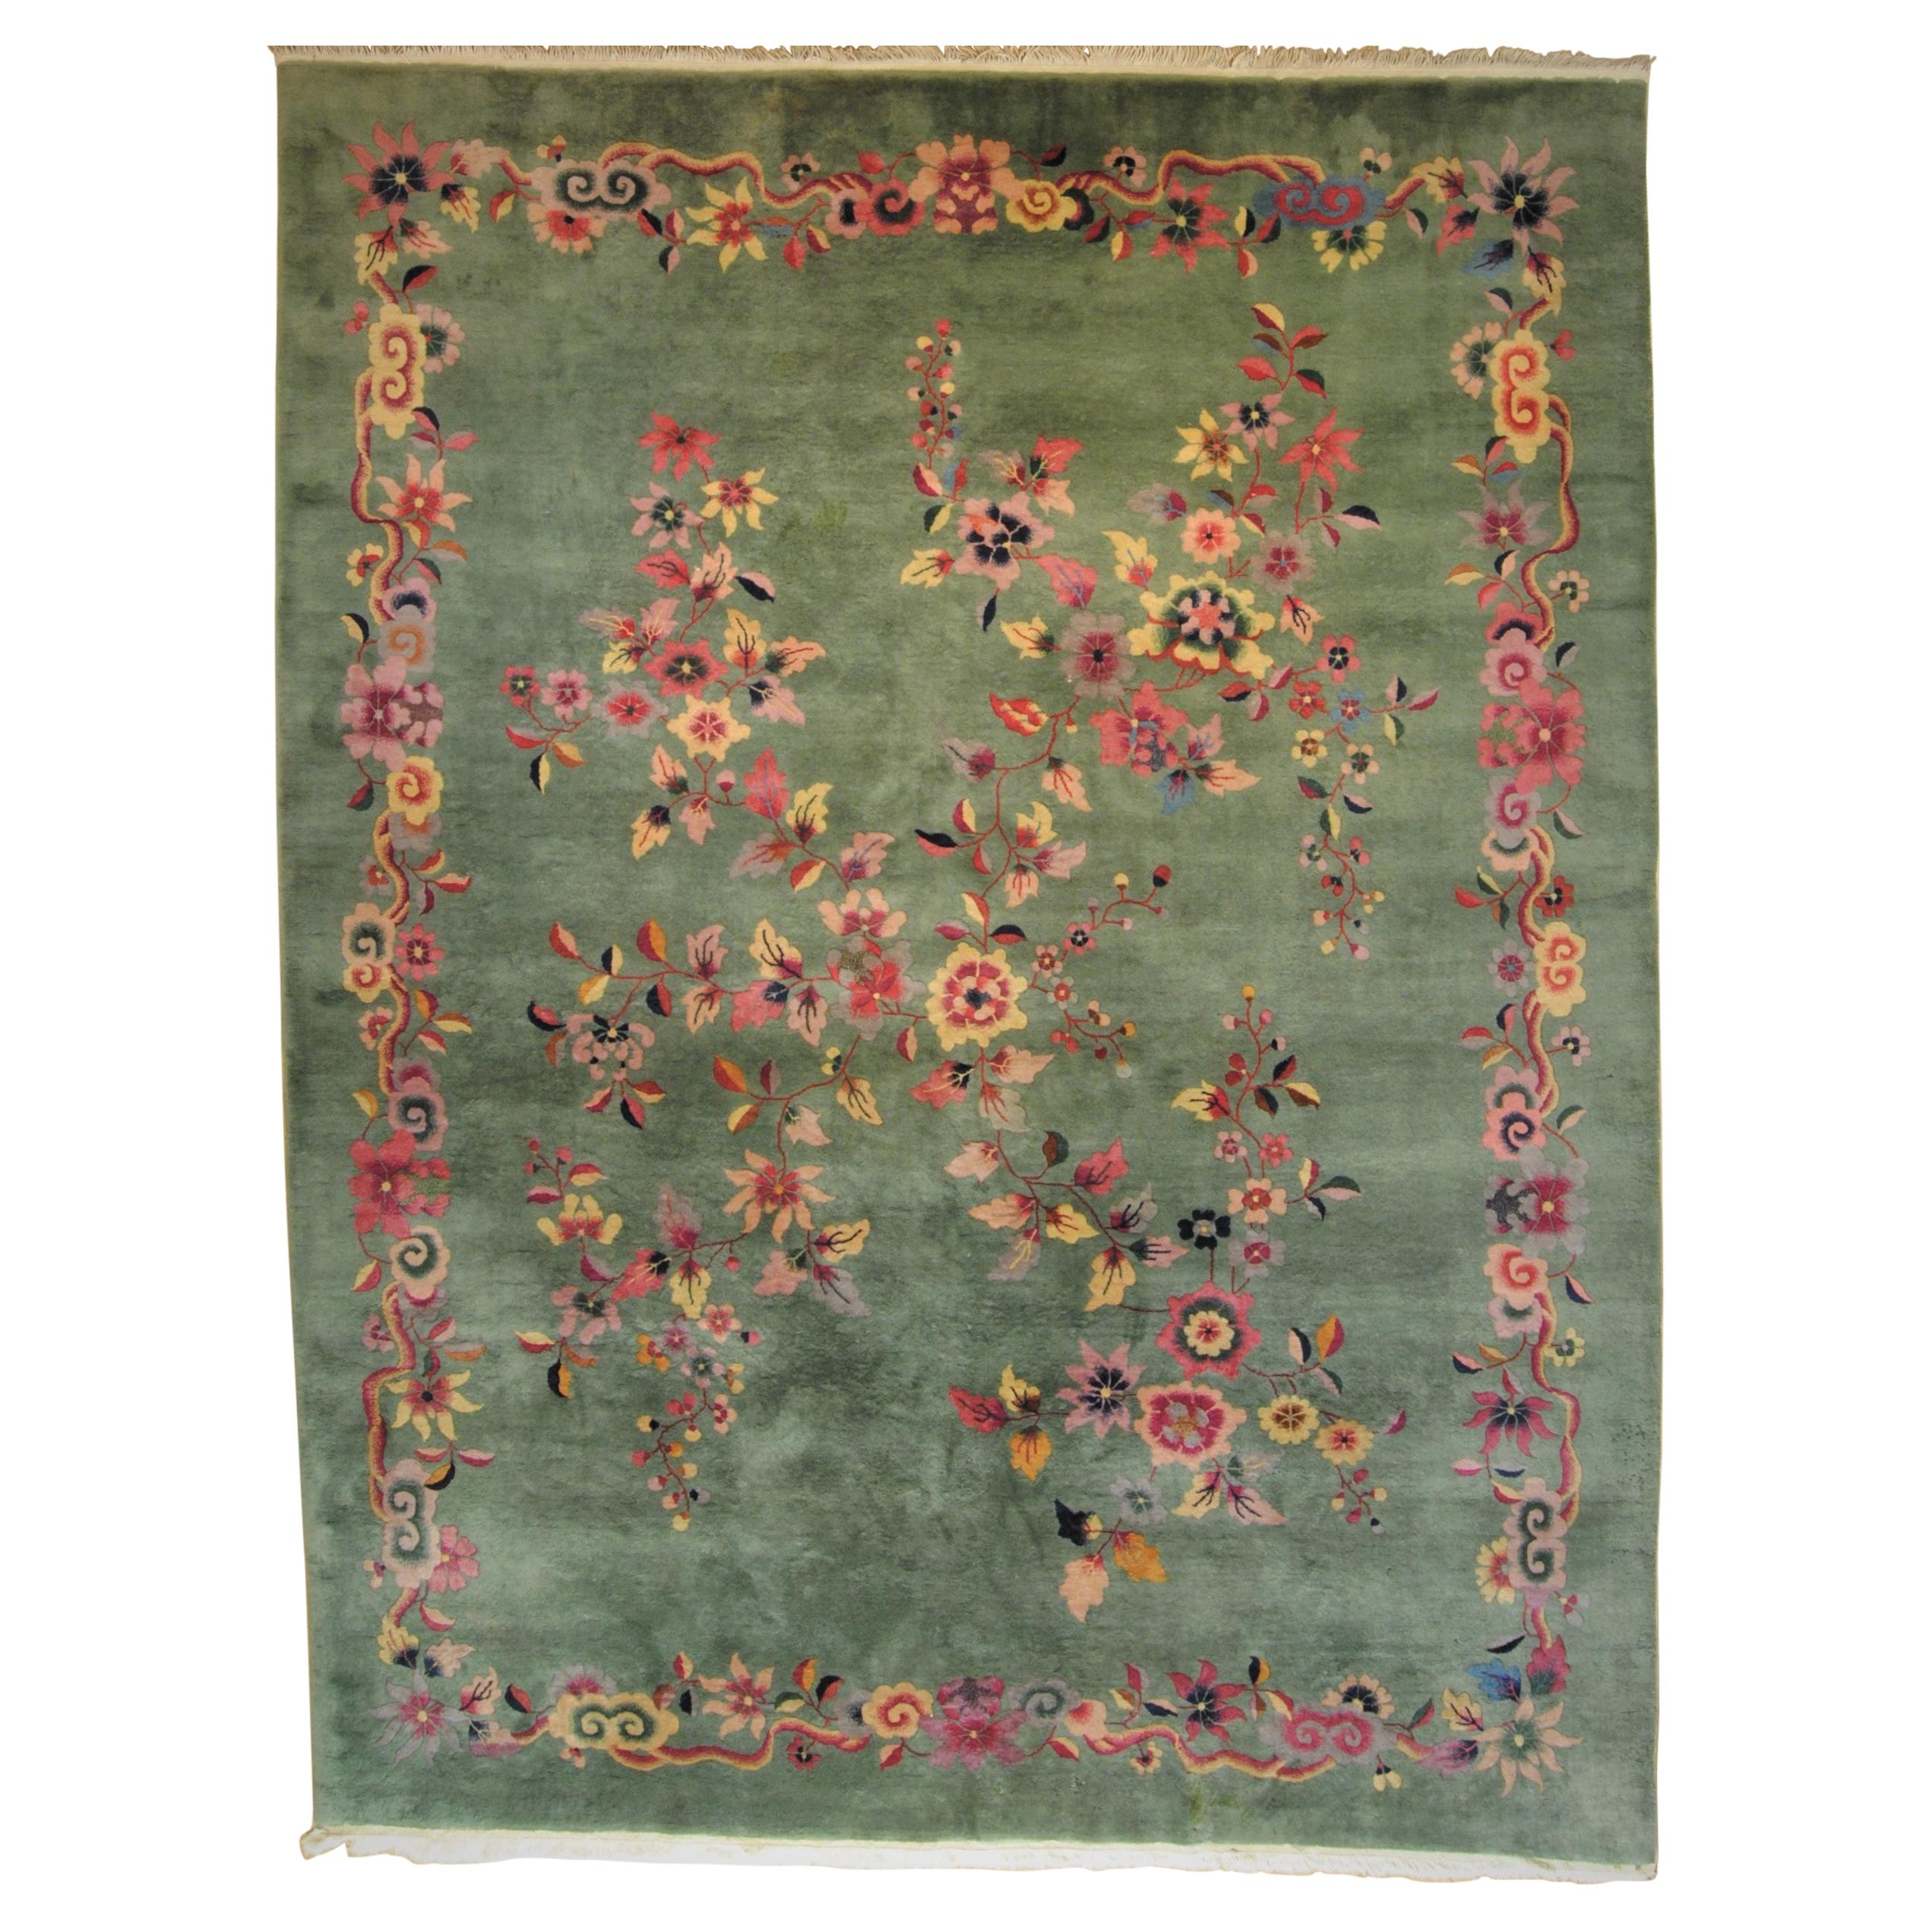 Green and Flower Art Deco Rug € 10, 000, ca 1920